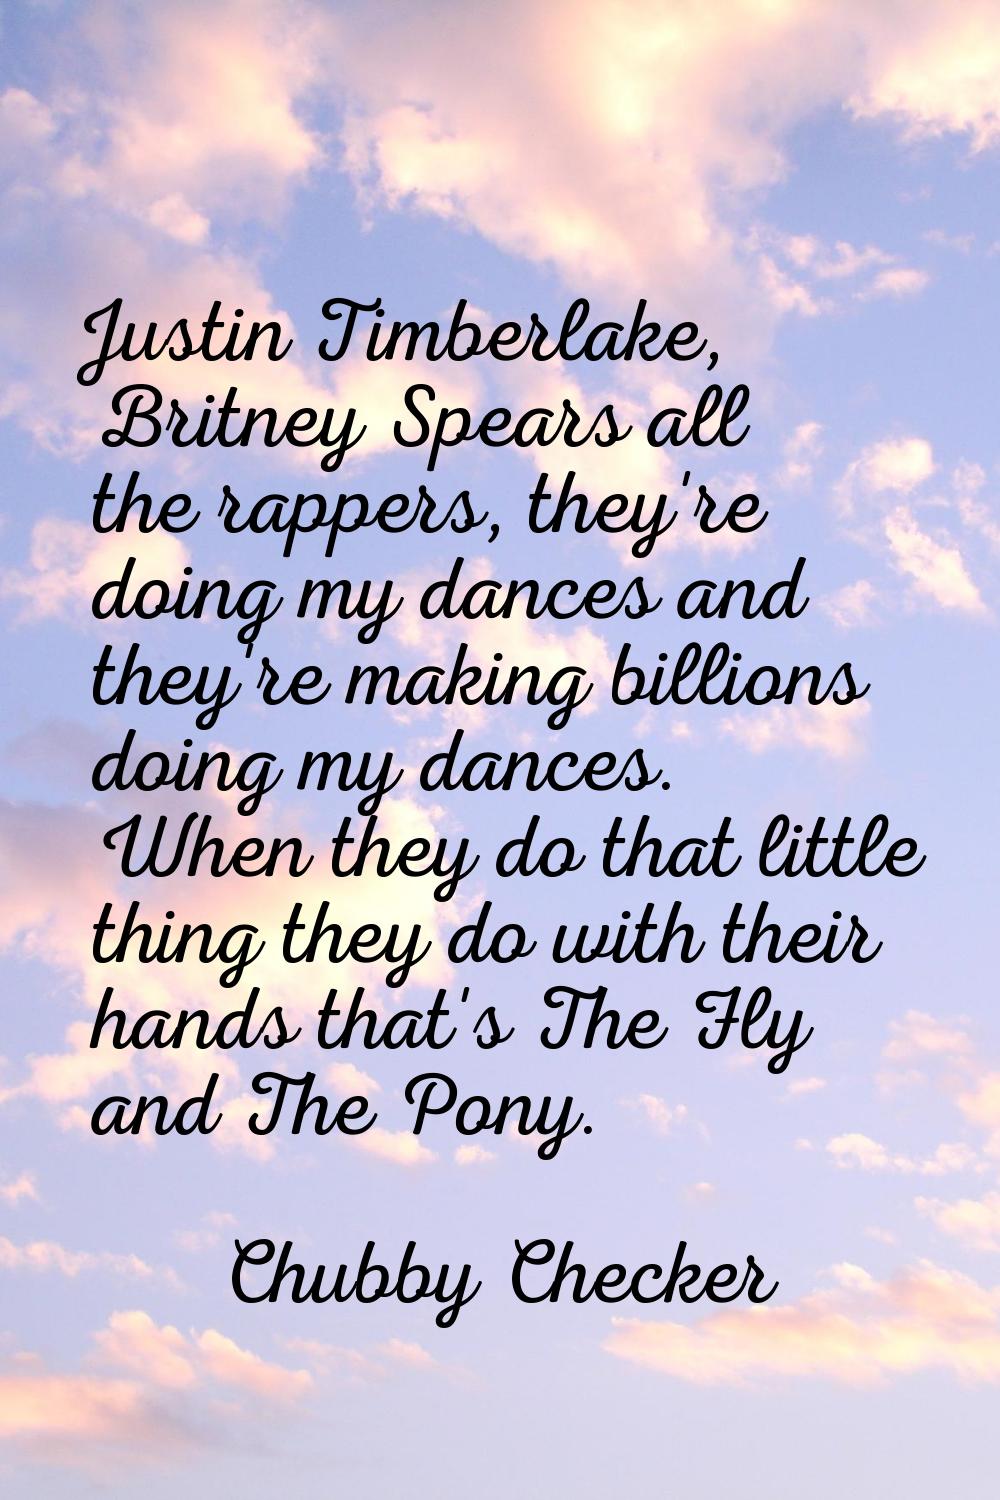 Justin Timberlake, Britney Spears all the rappers, they're doing my dances and they're making billi